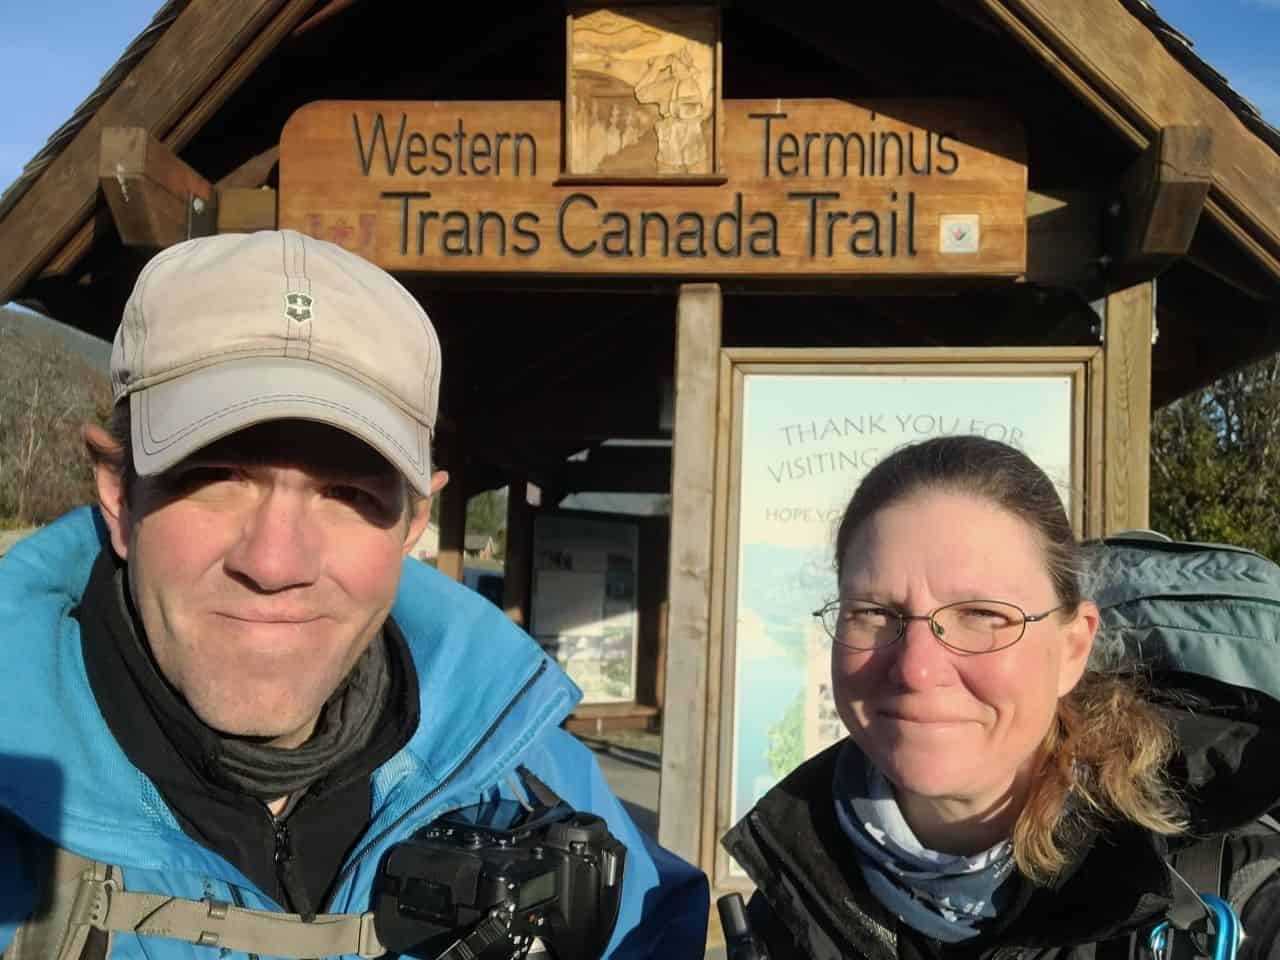 Our list of the 5 best rail trails in BC, Canada was compiled during our 14,000 km long cross country hike on the Trans Canada Trail.